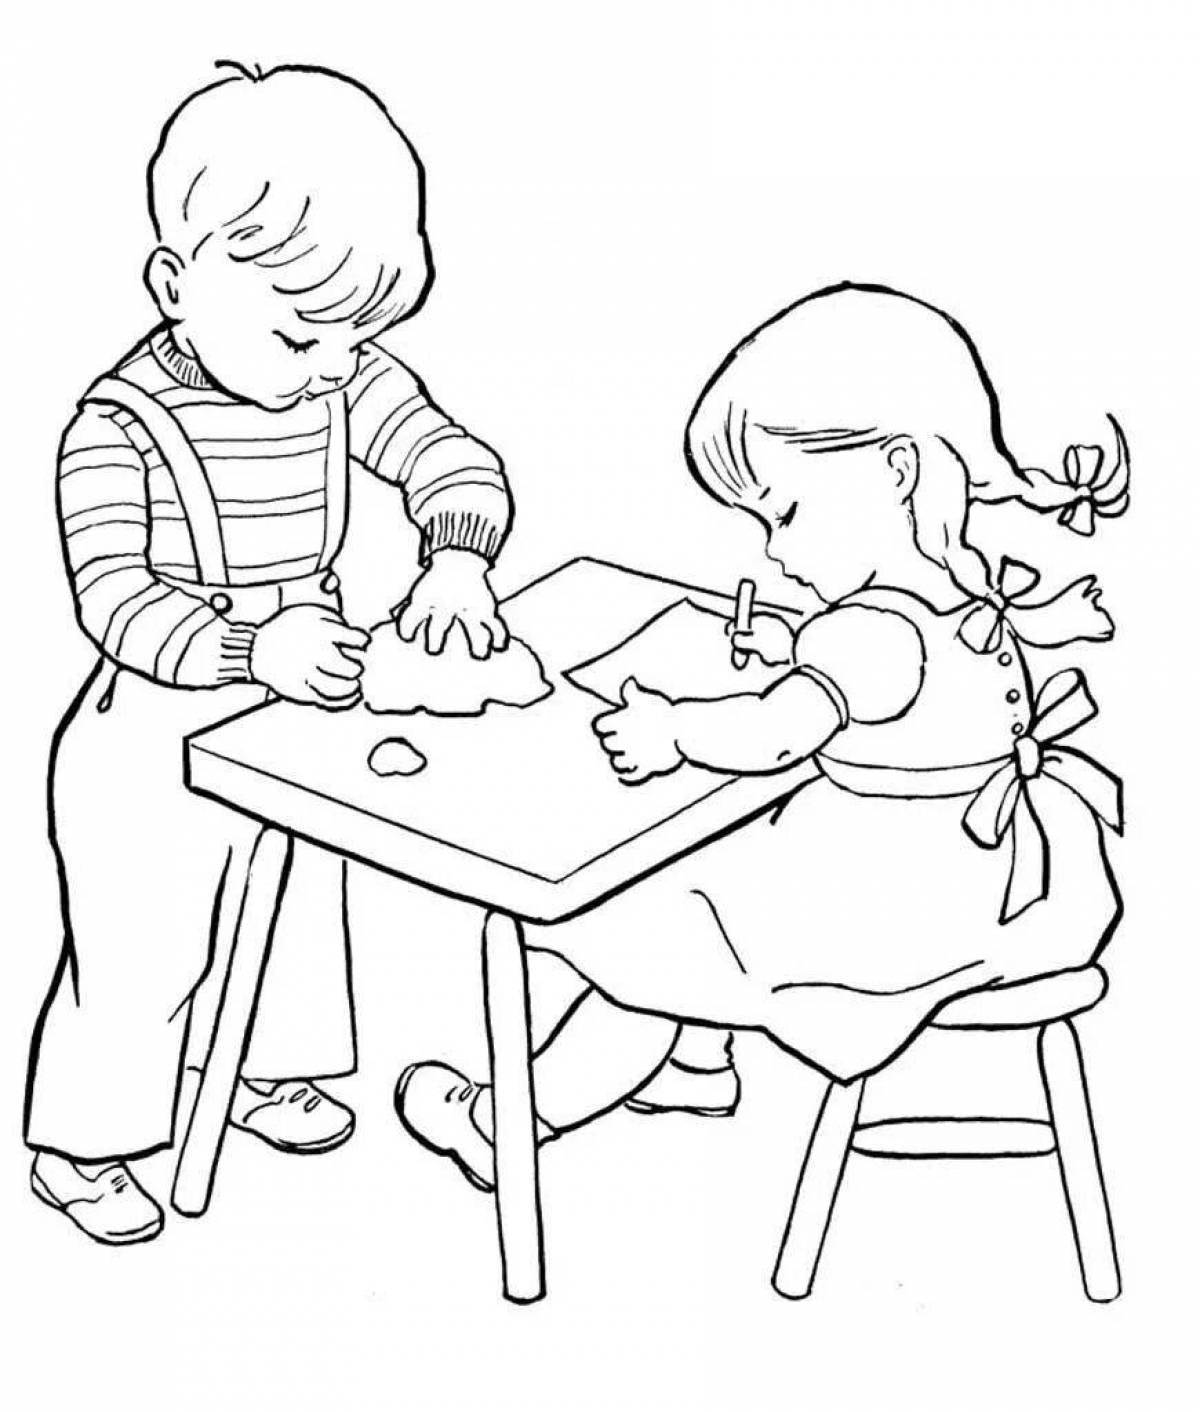 Creative table manners coloring book